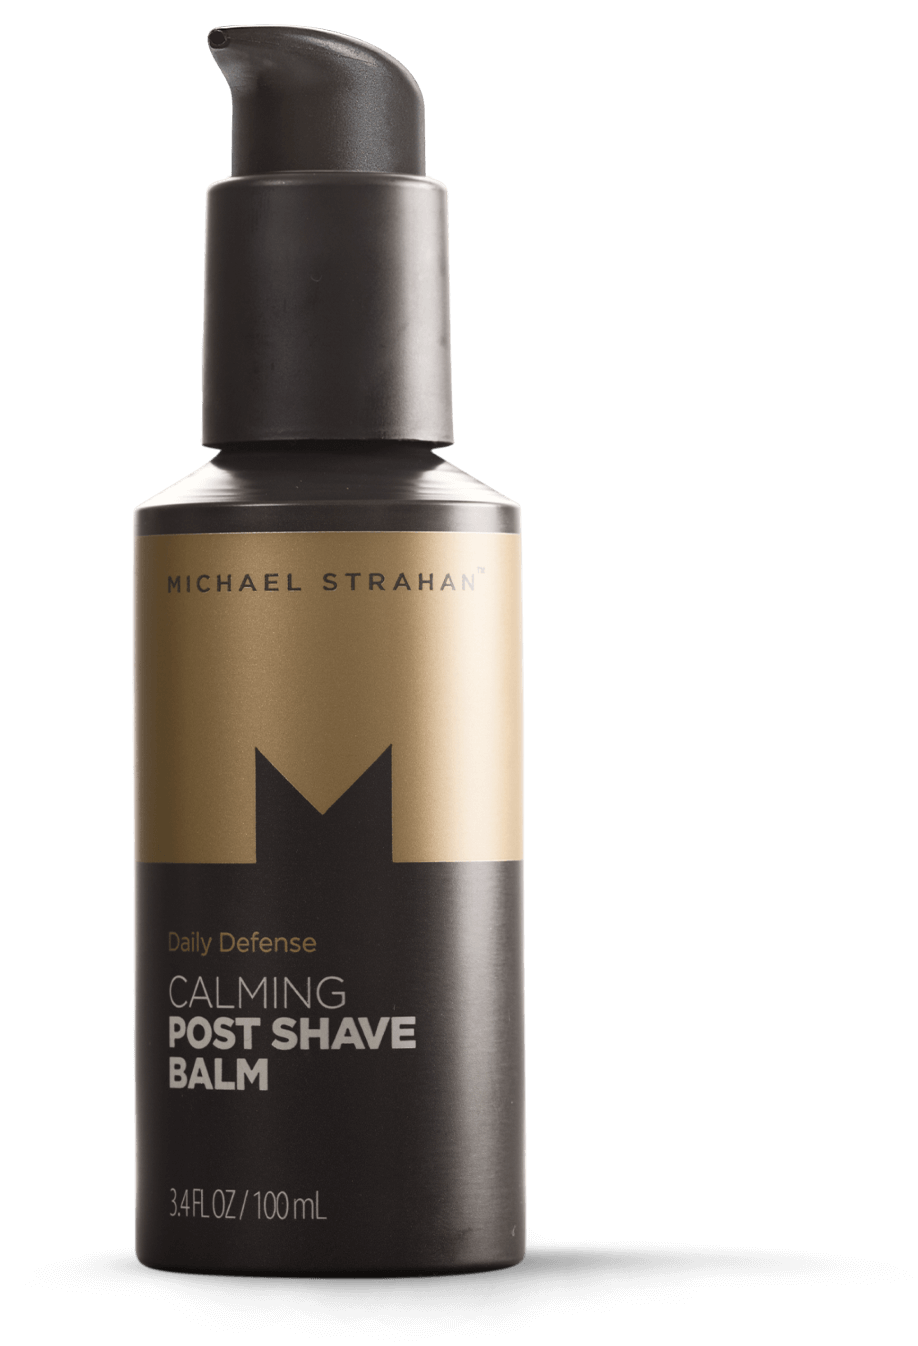 Calming Post Shave Balm